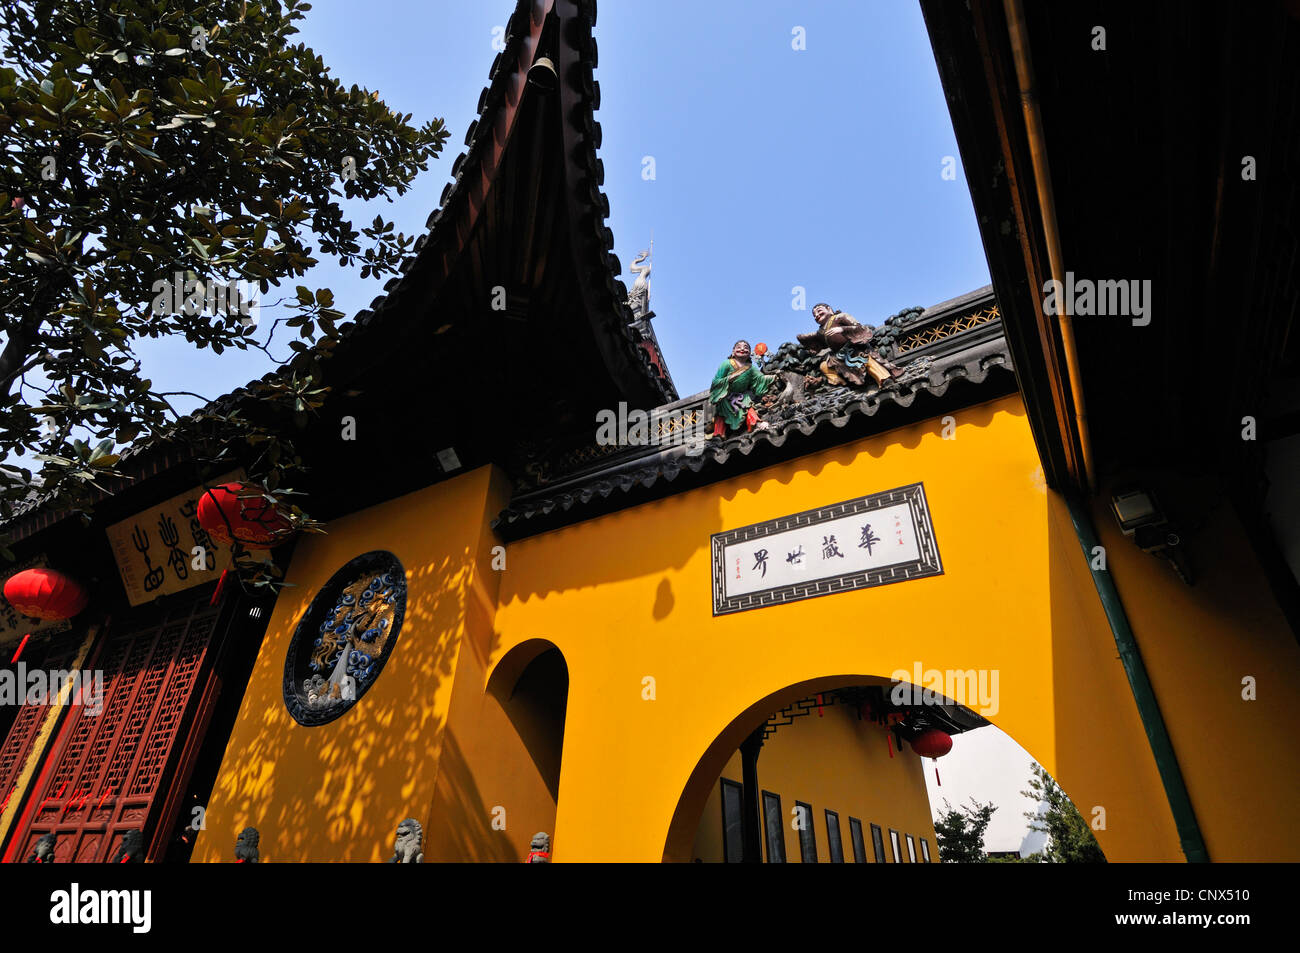 Moongate in the sacred colours of red and gold with inscribed motto, Jade Buddha Temple, Shanghai, China Stock Photo